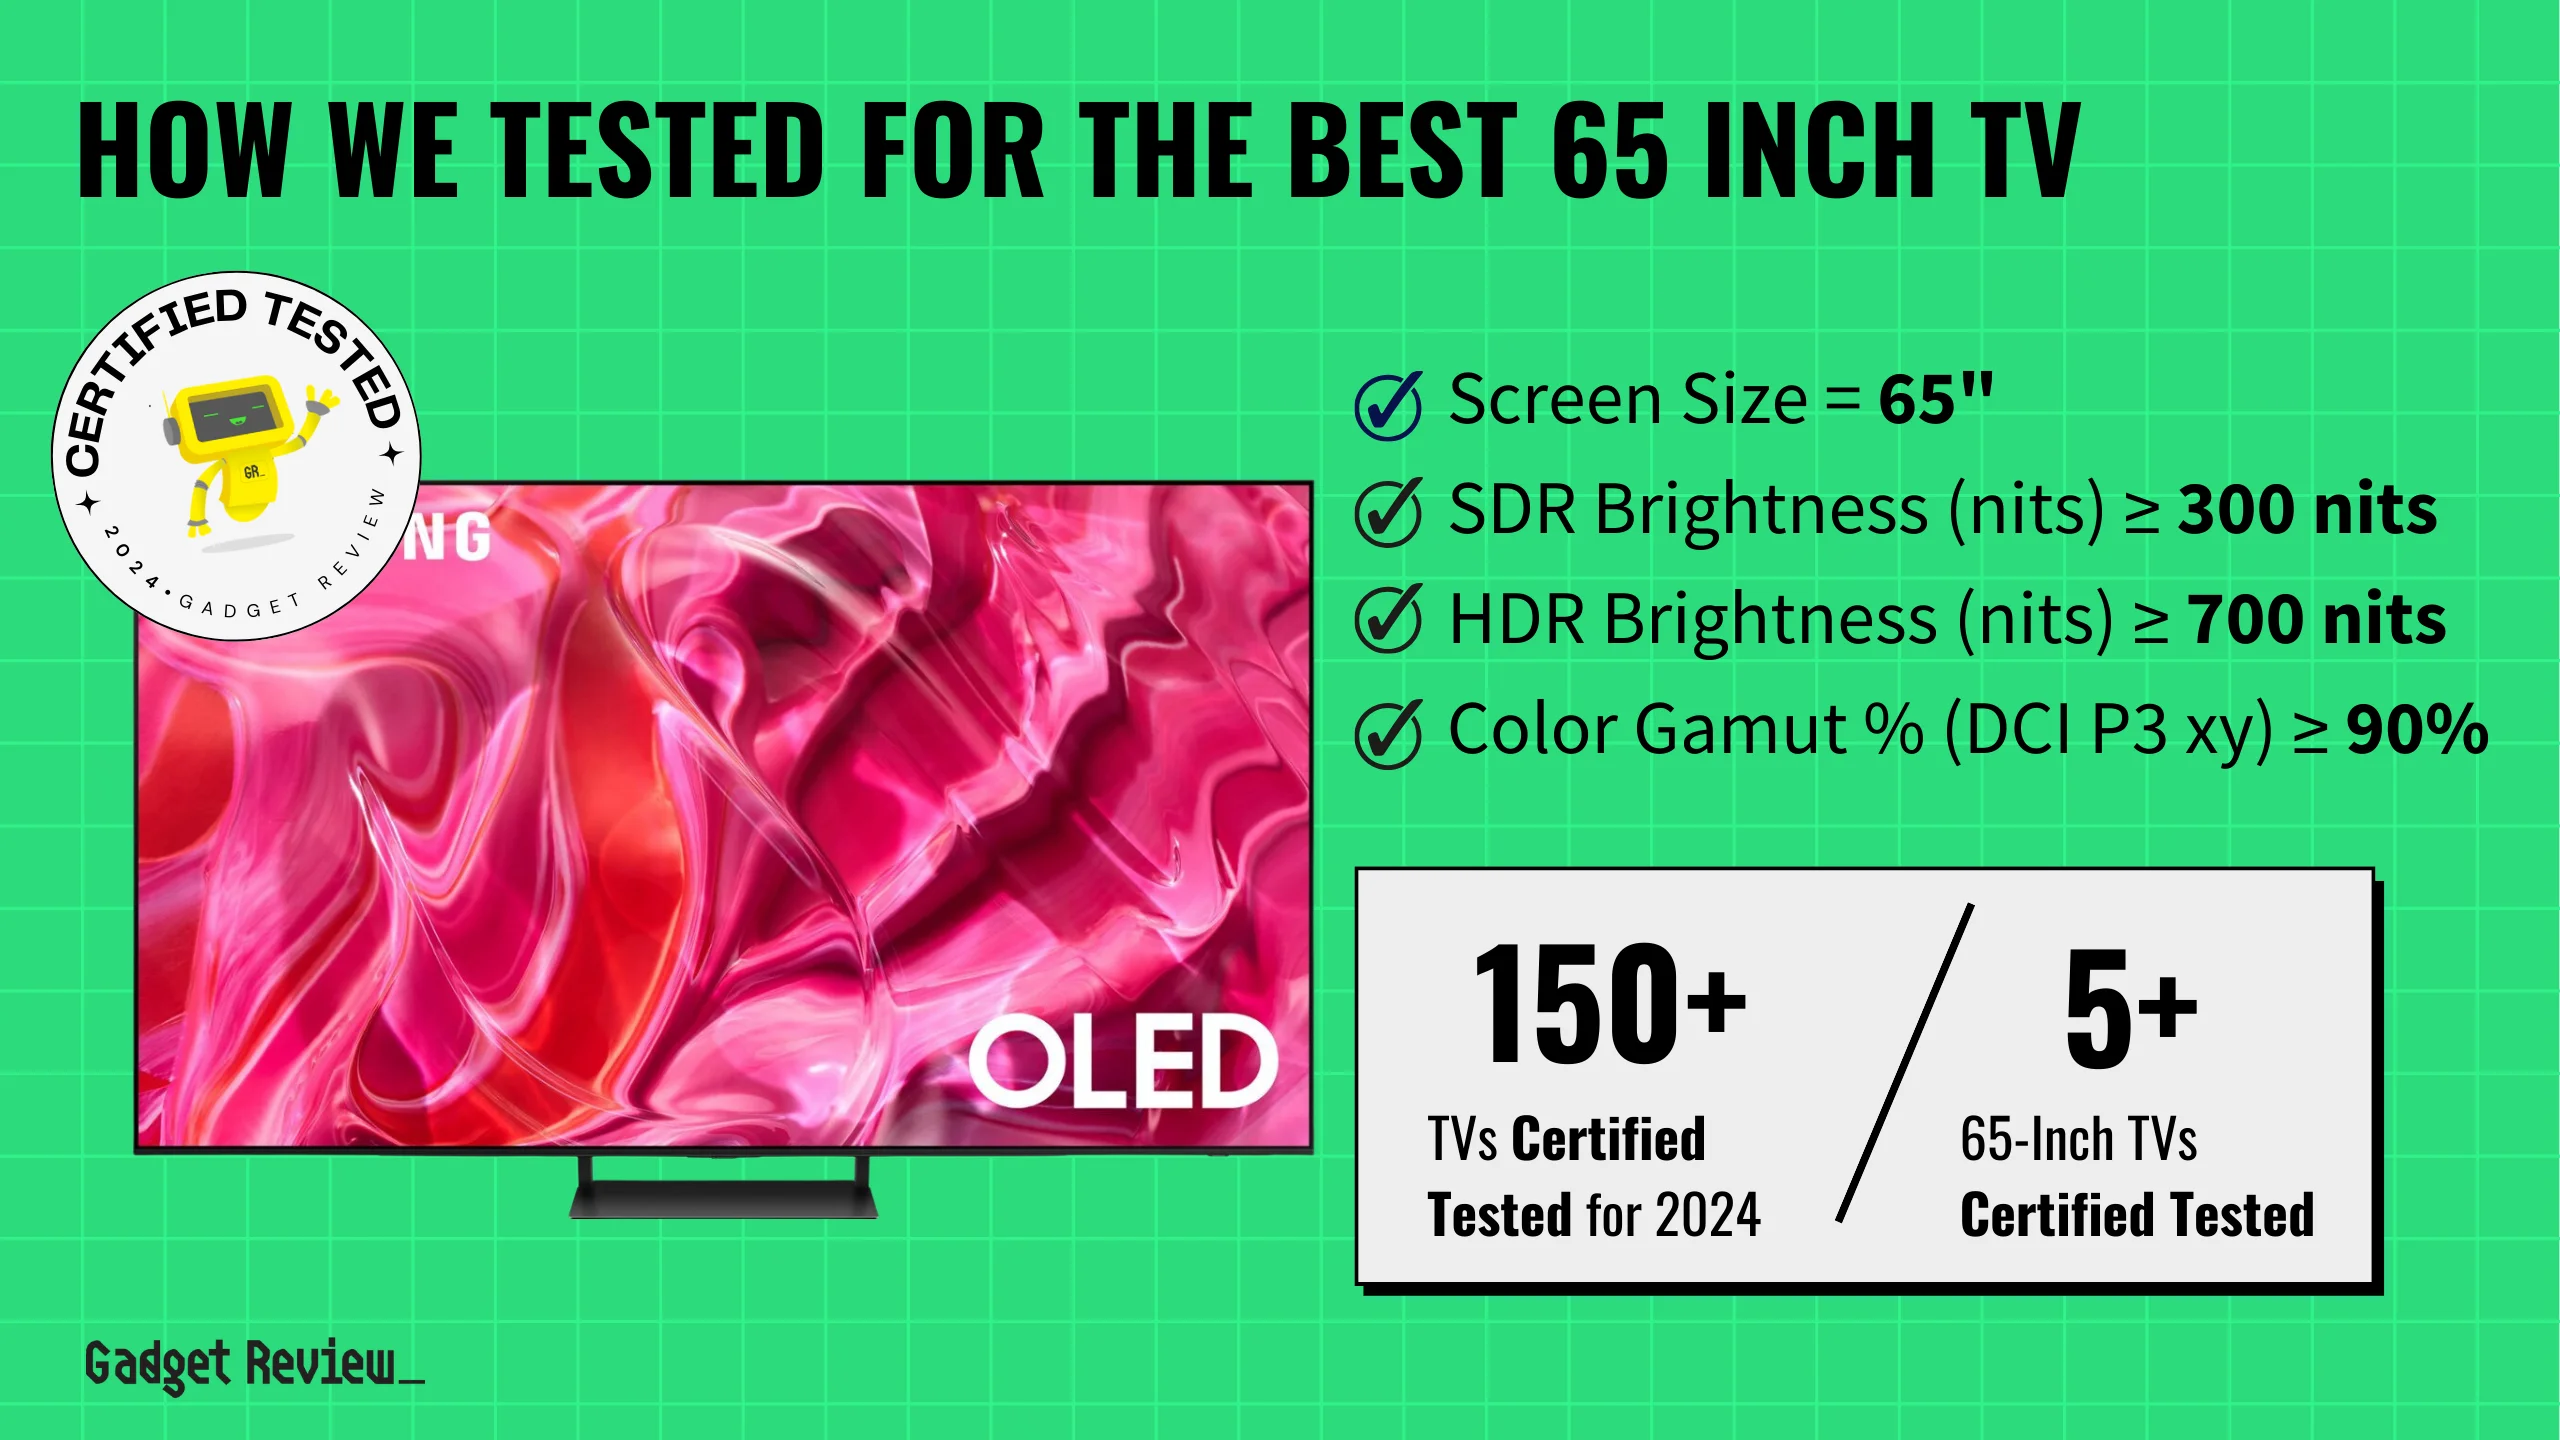 What Are The 6 Top 65 Inch TVs?